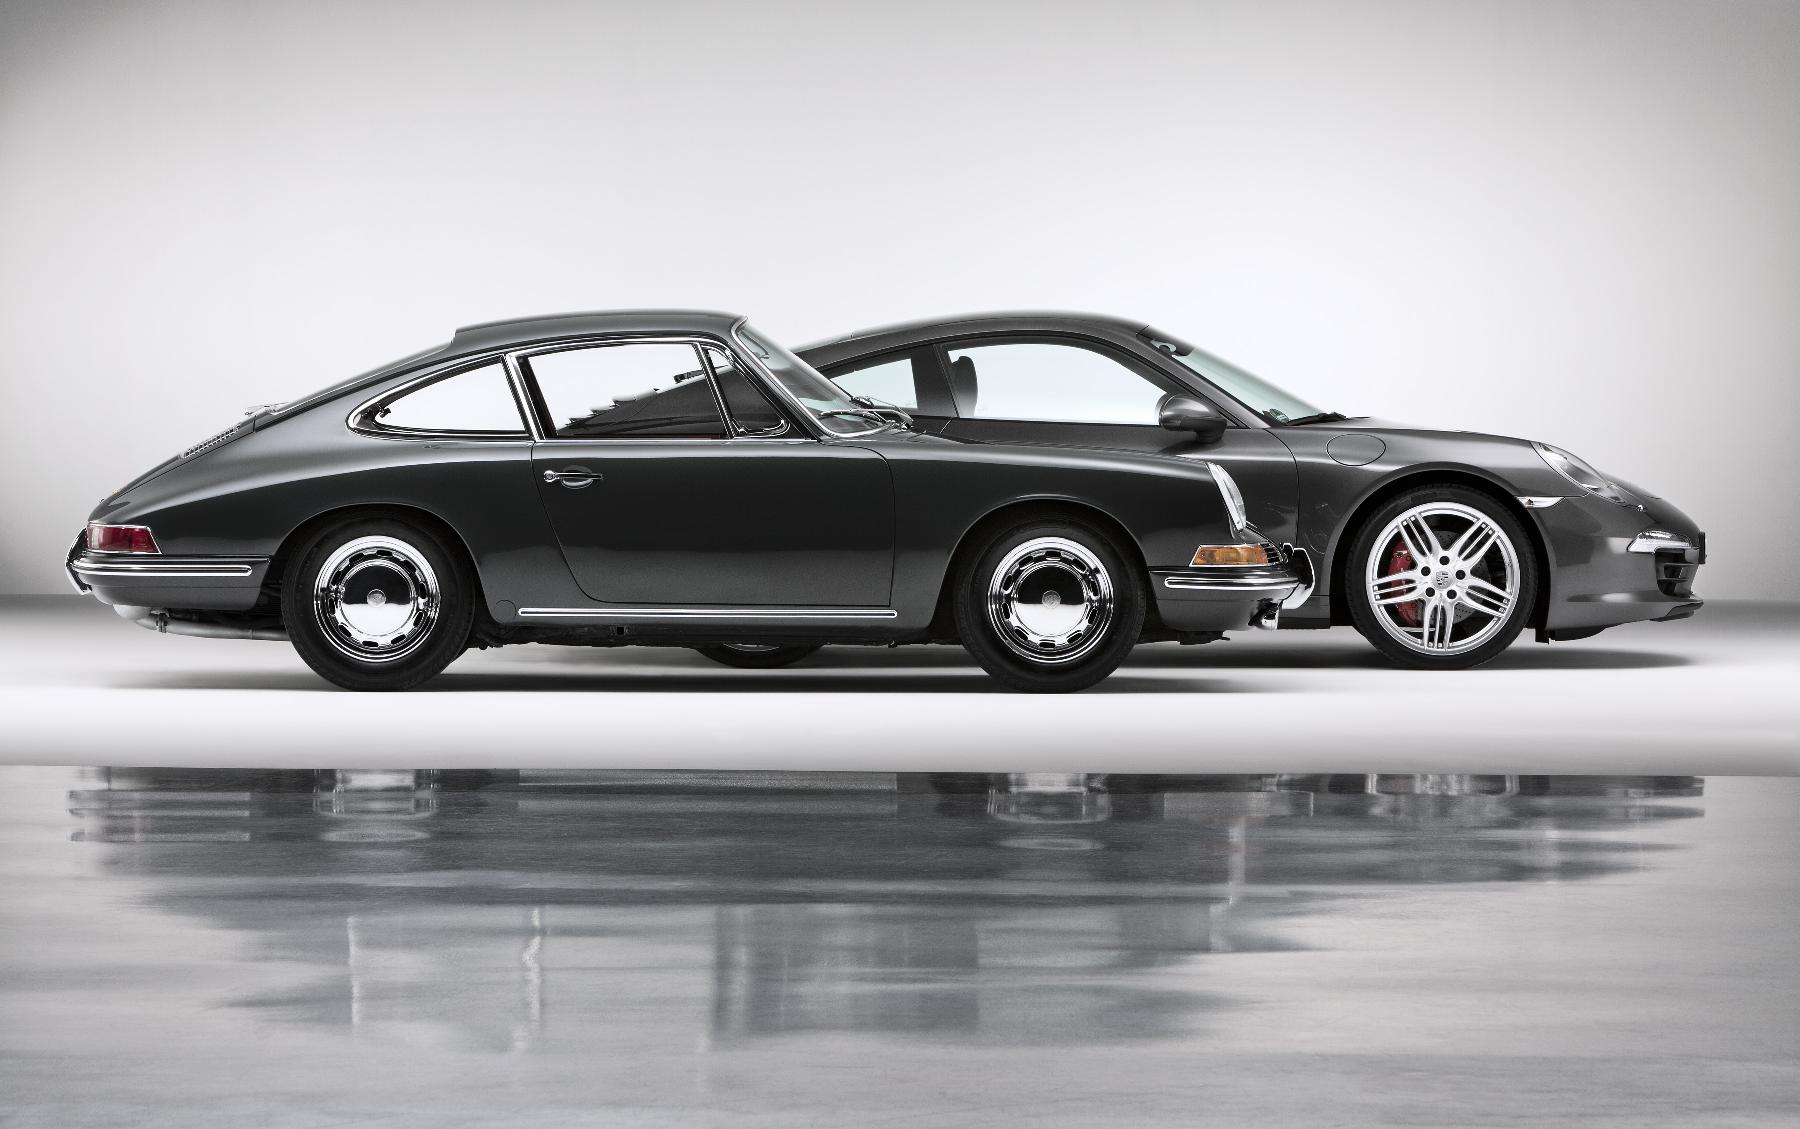 Goodwood to mark 50 years of Porsche’s iconic 911 sports car